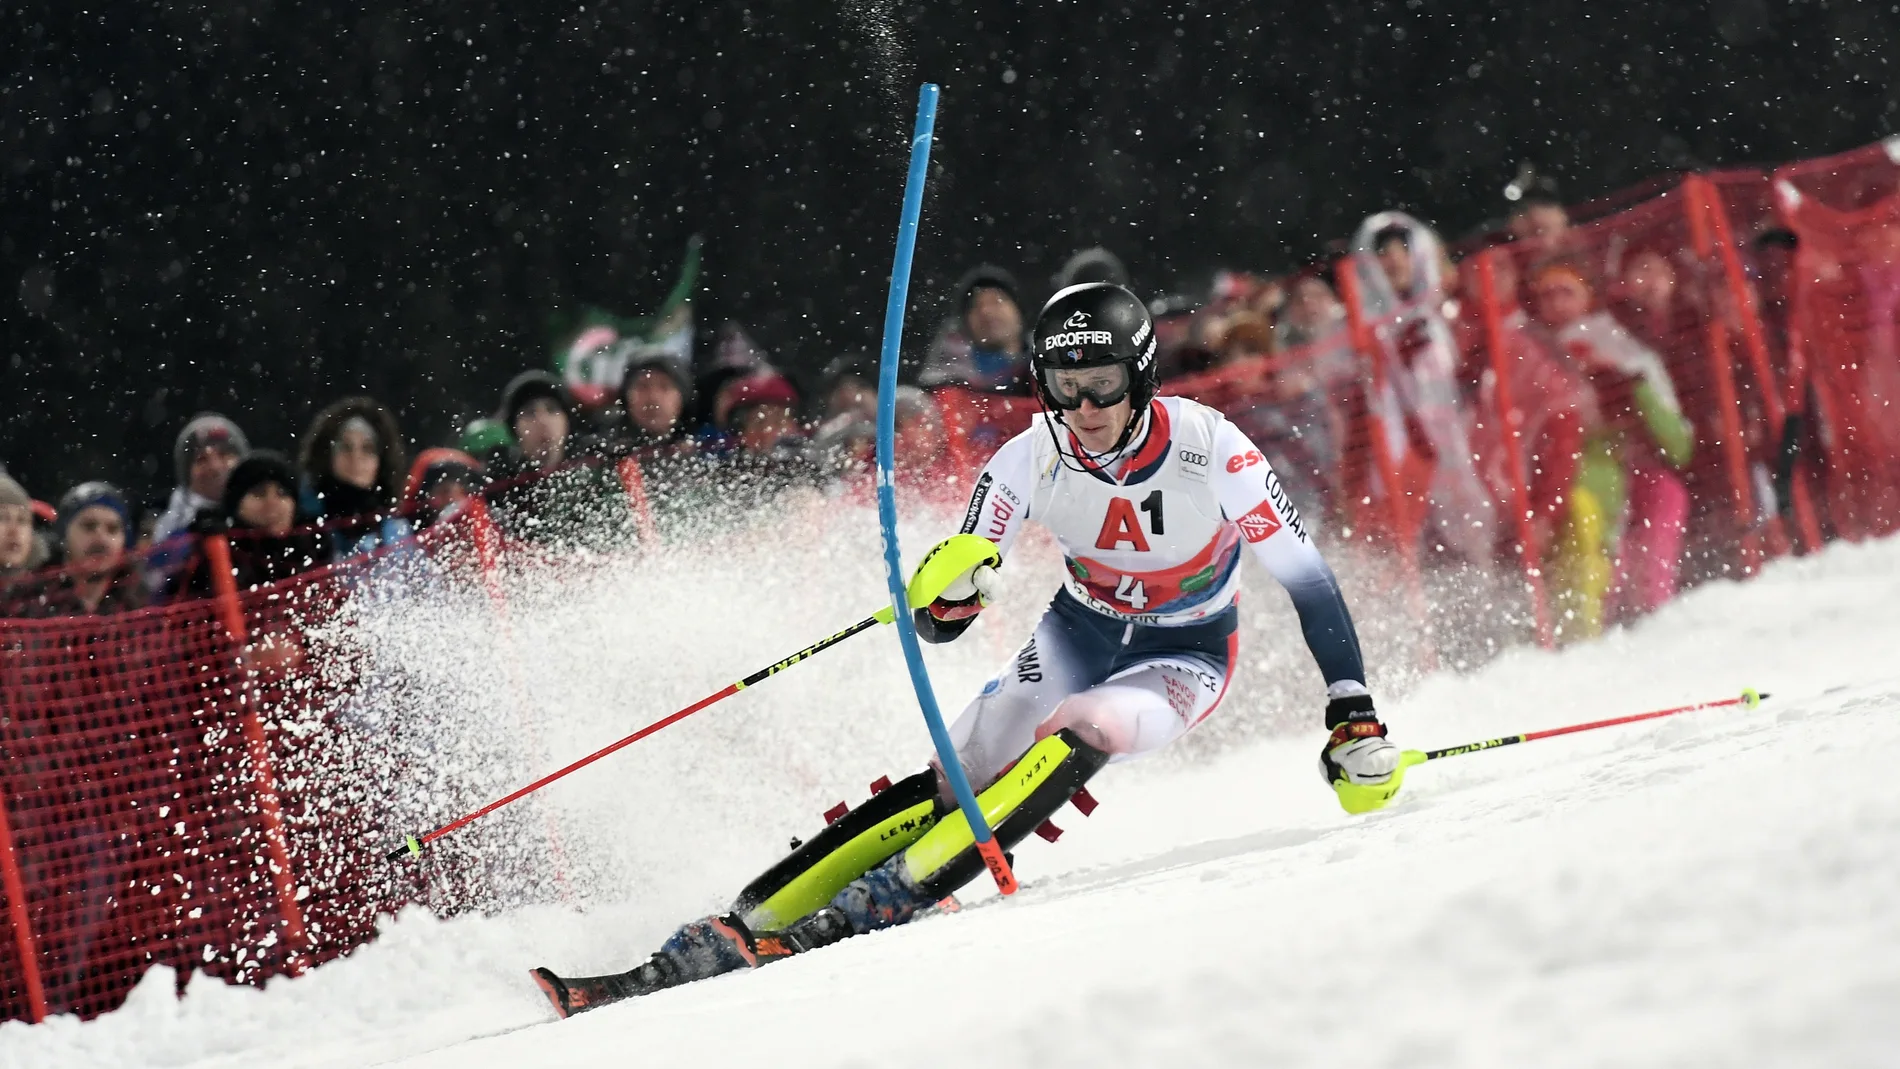 FIS Alpine Skiing World Cup in Schladming